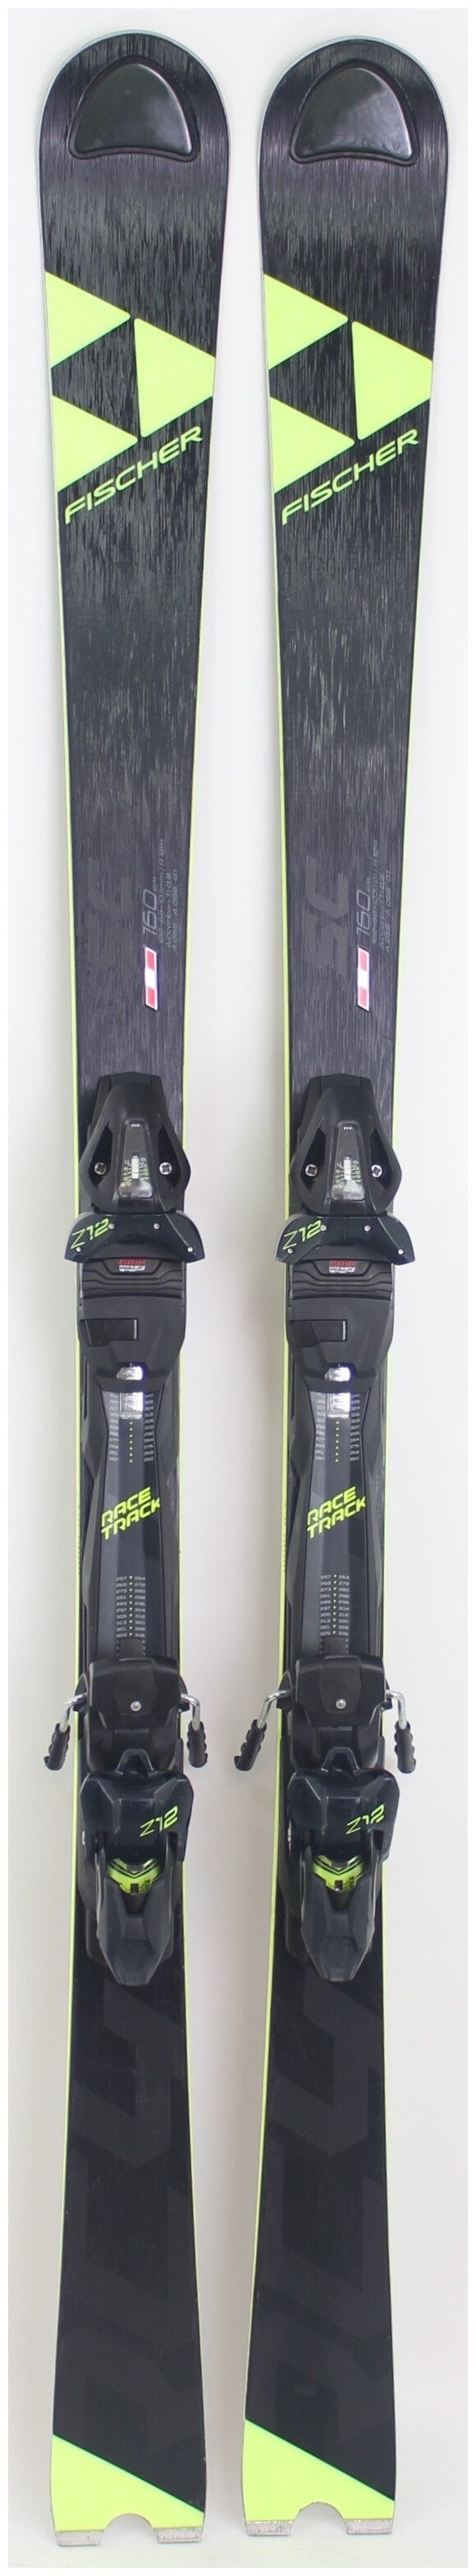 2020, Fischer, RC4 Worldcup SC Skis with Fischer Z12 RaceTrack Bindings  Used Demo Skis 160cm